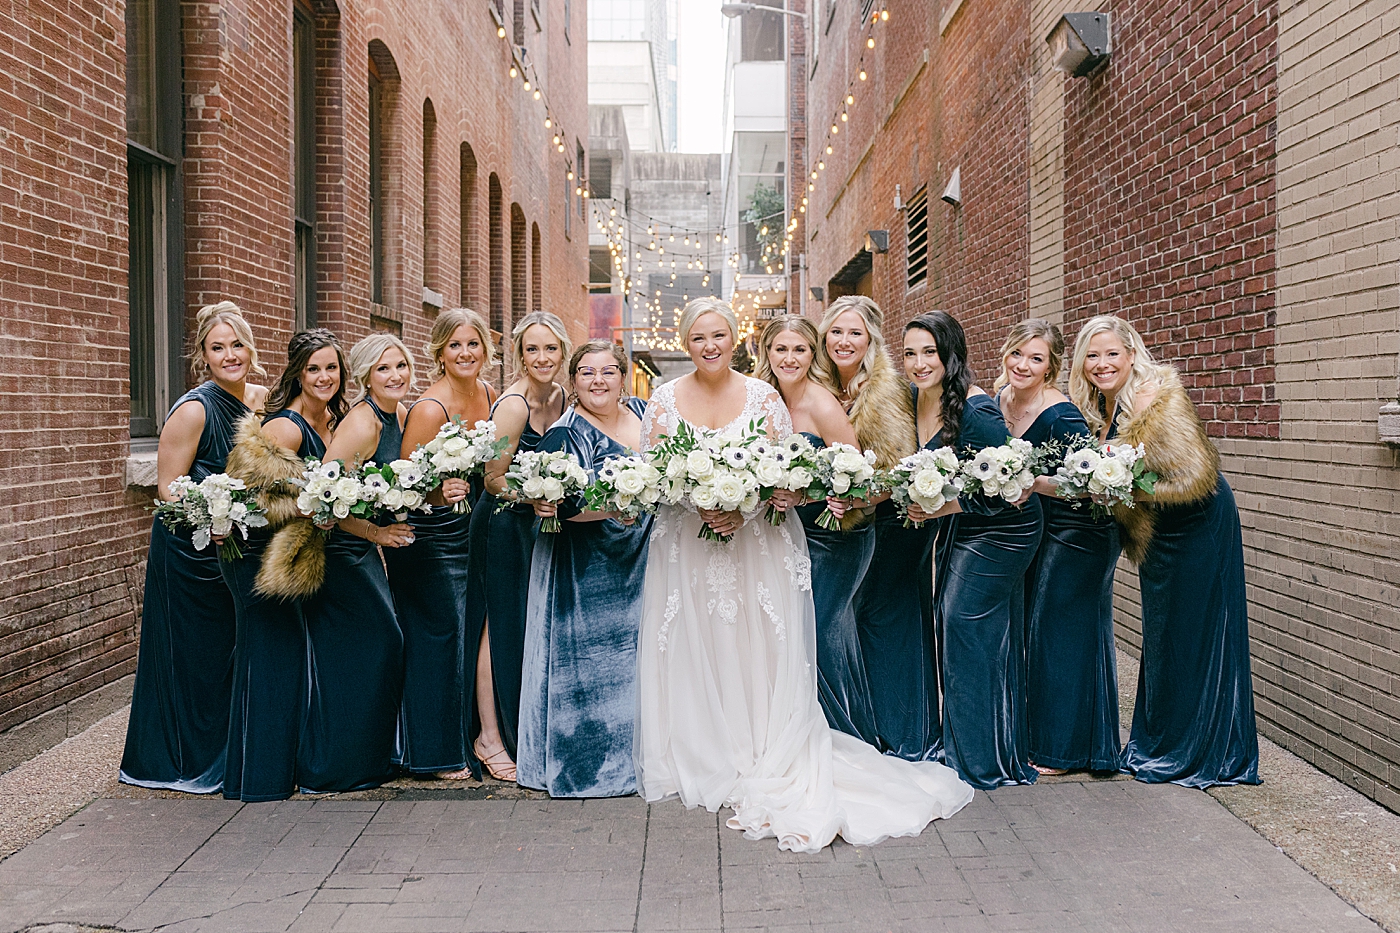 Bridal party photos at Printers Alley | Photo by Hope Helmuth Photography